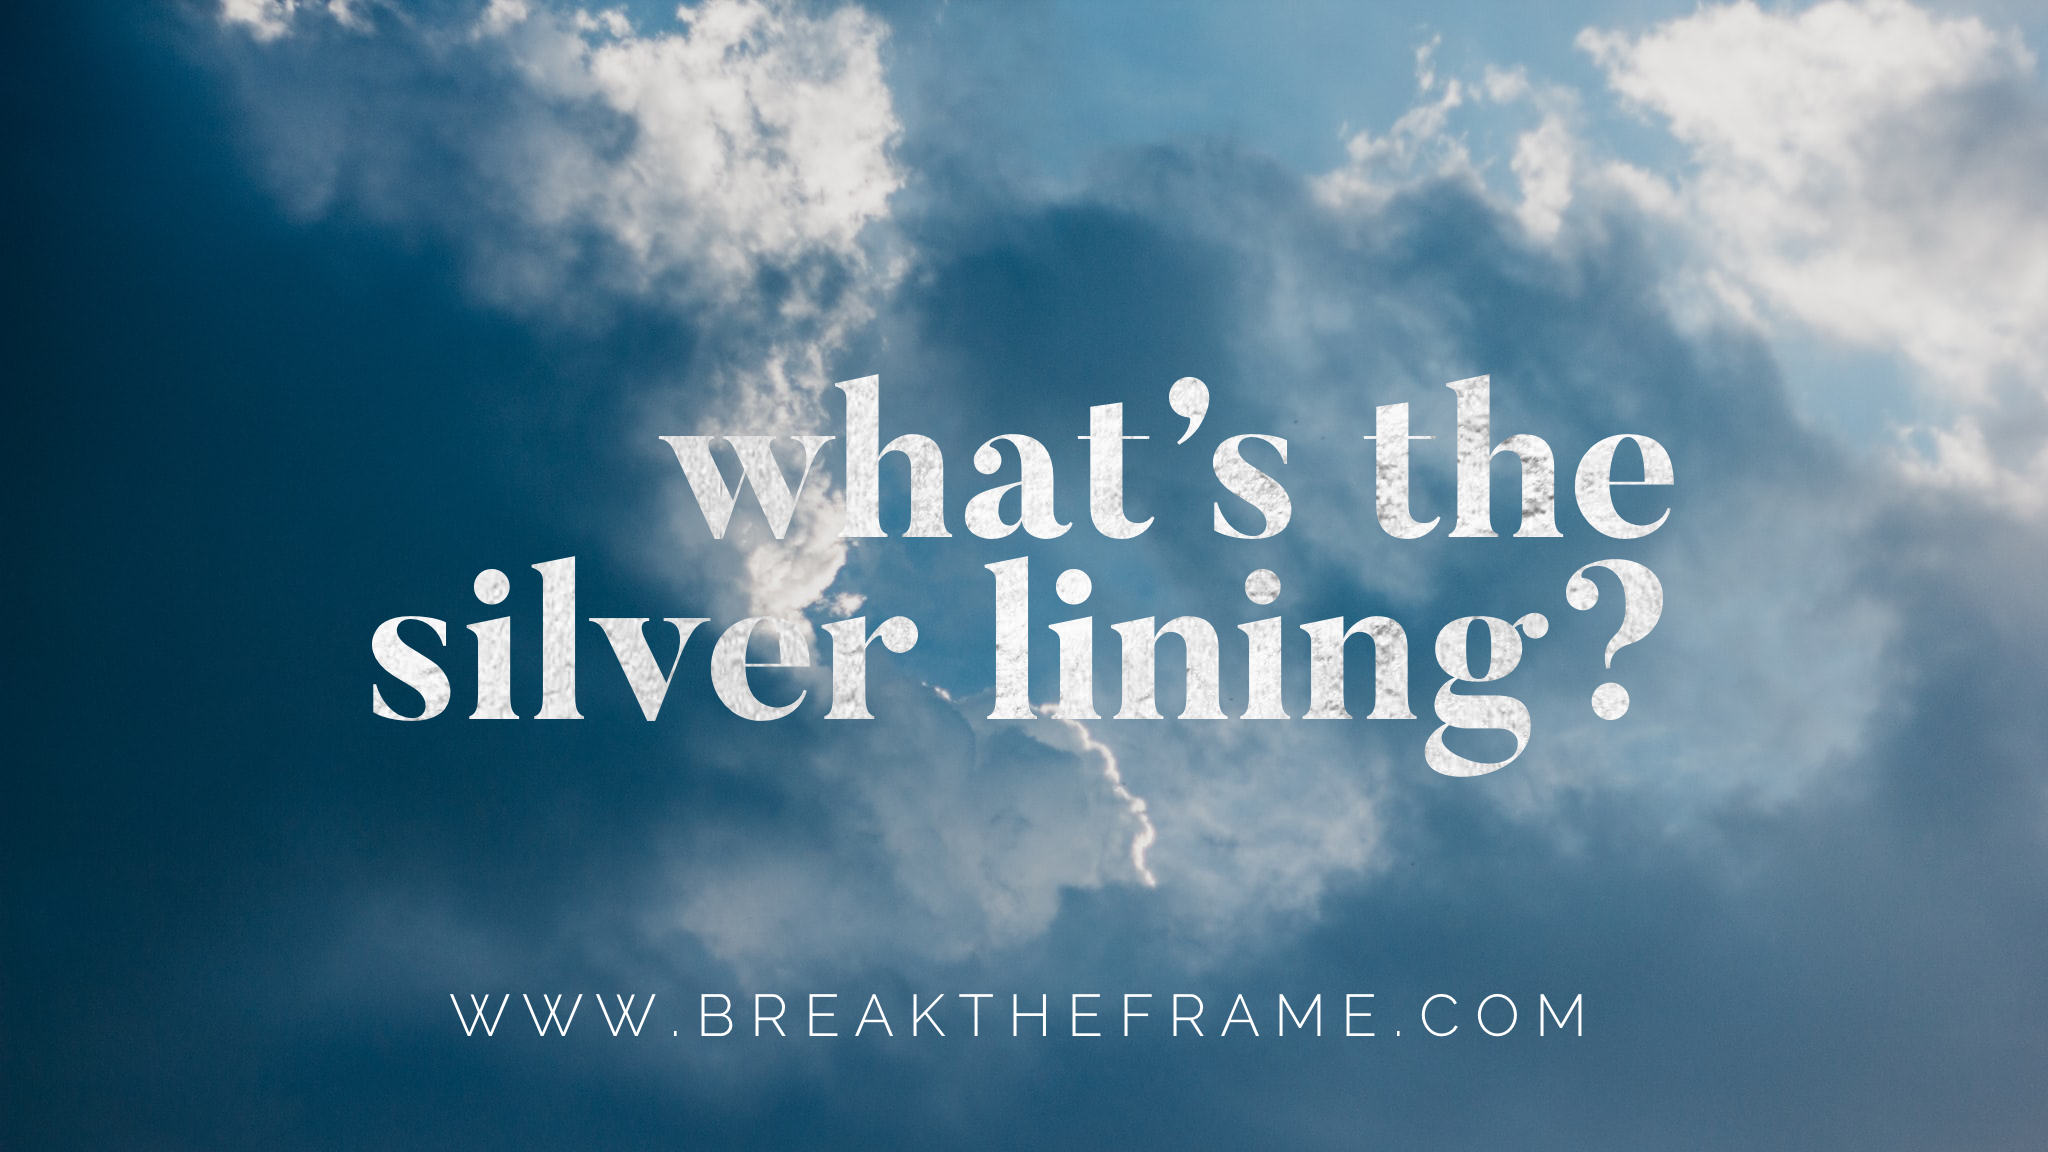 Want to Make Life Instantly Better? Look for a Silver Lining